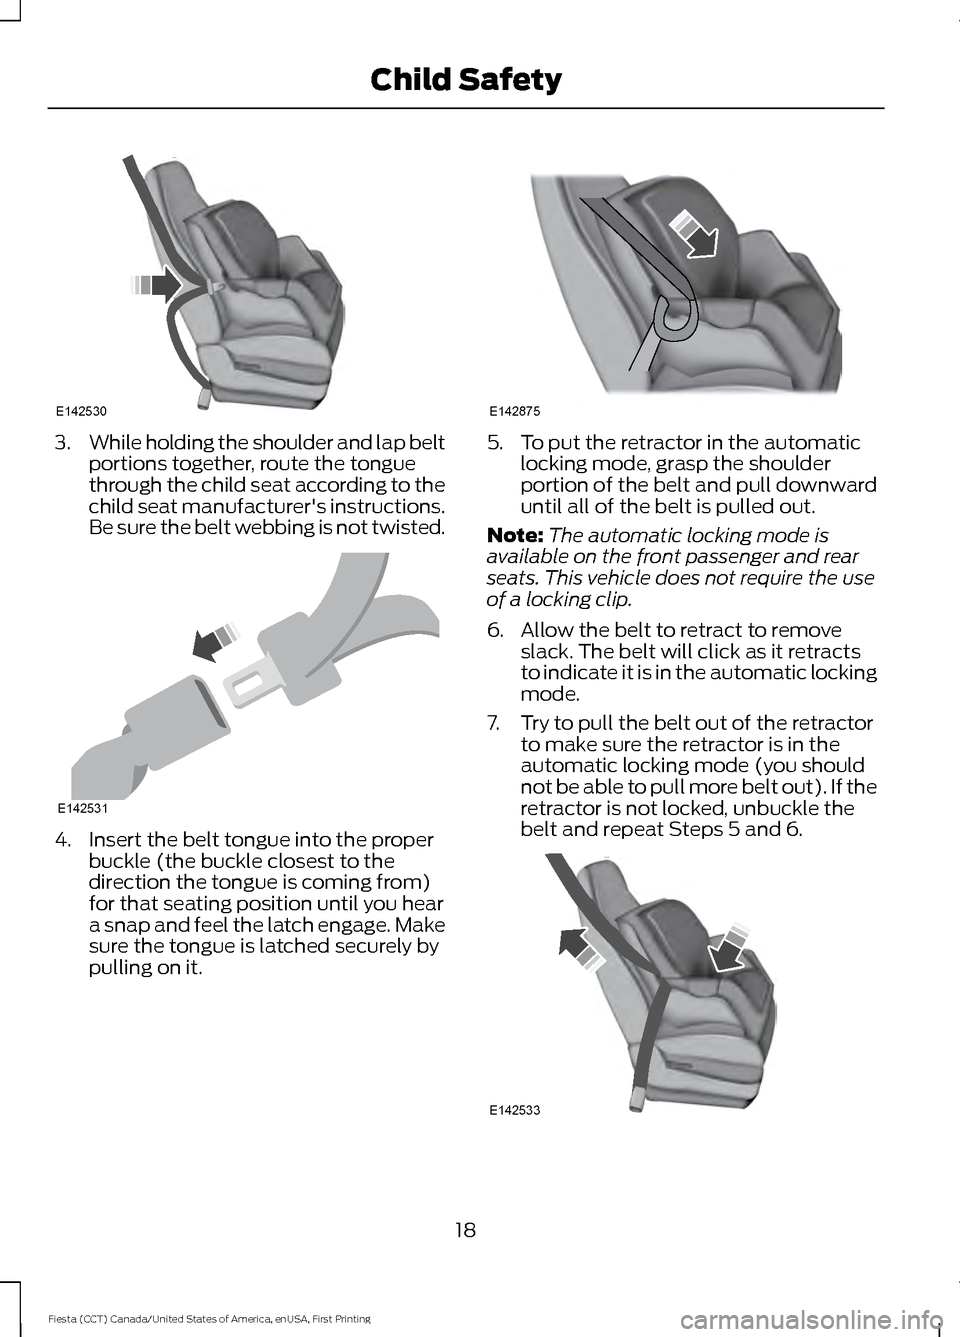 FORD FIESTA 2016 6.G Owners Manual 3.
While holding the shoulder and lap belt
portions together, route the tongue
through the child seat according to the
child seat manufacturers instructions.
Be sure the belt webbing is not twisted. 